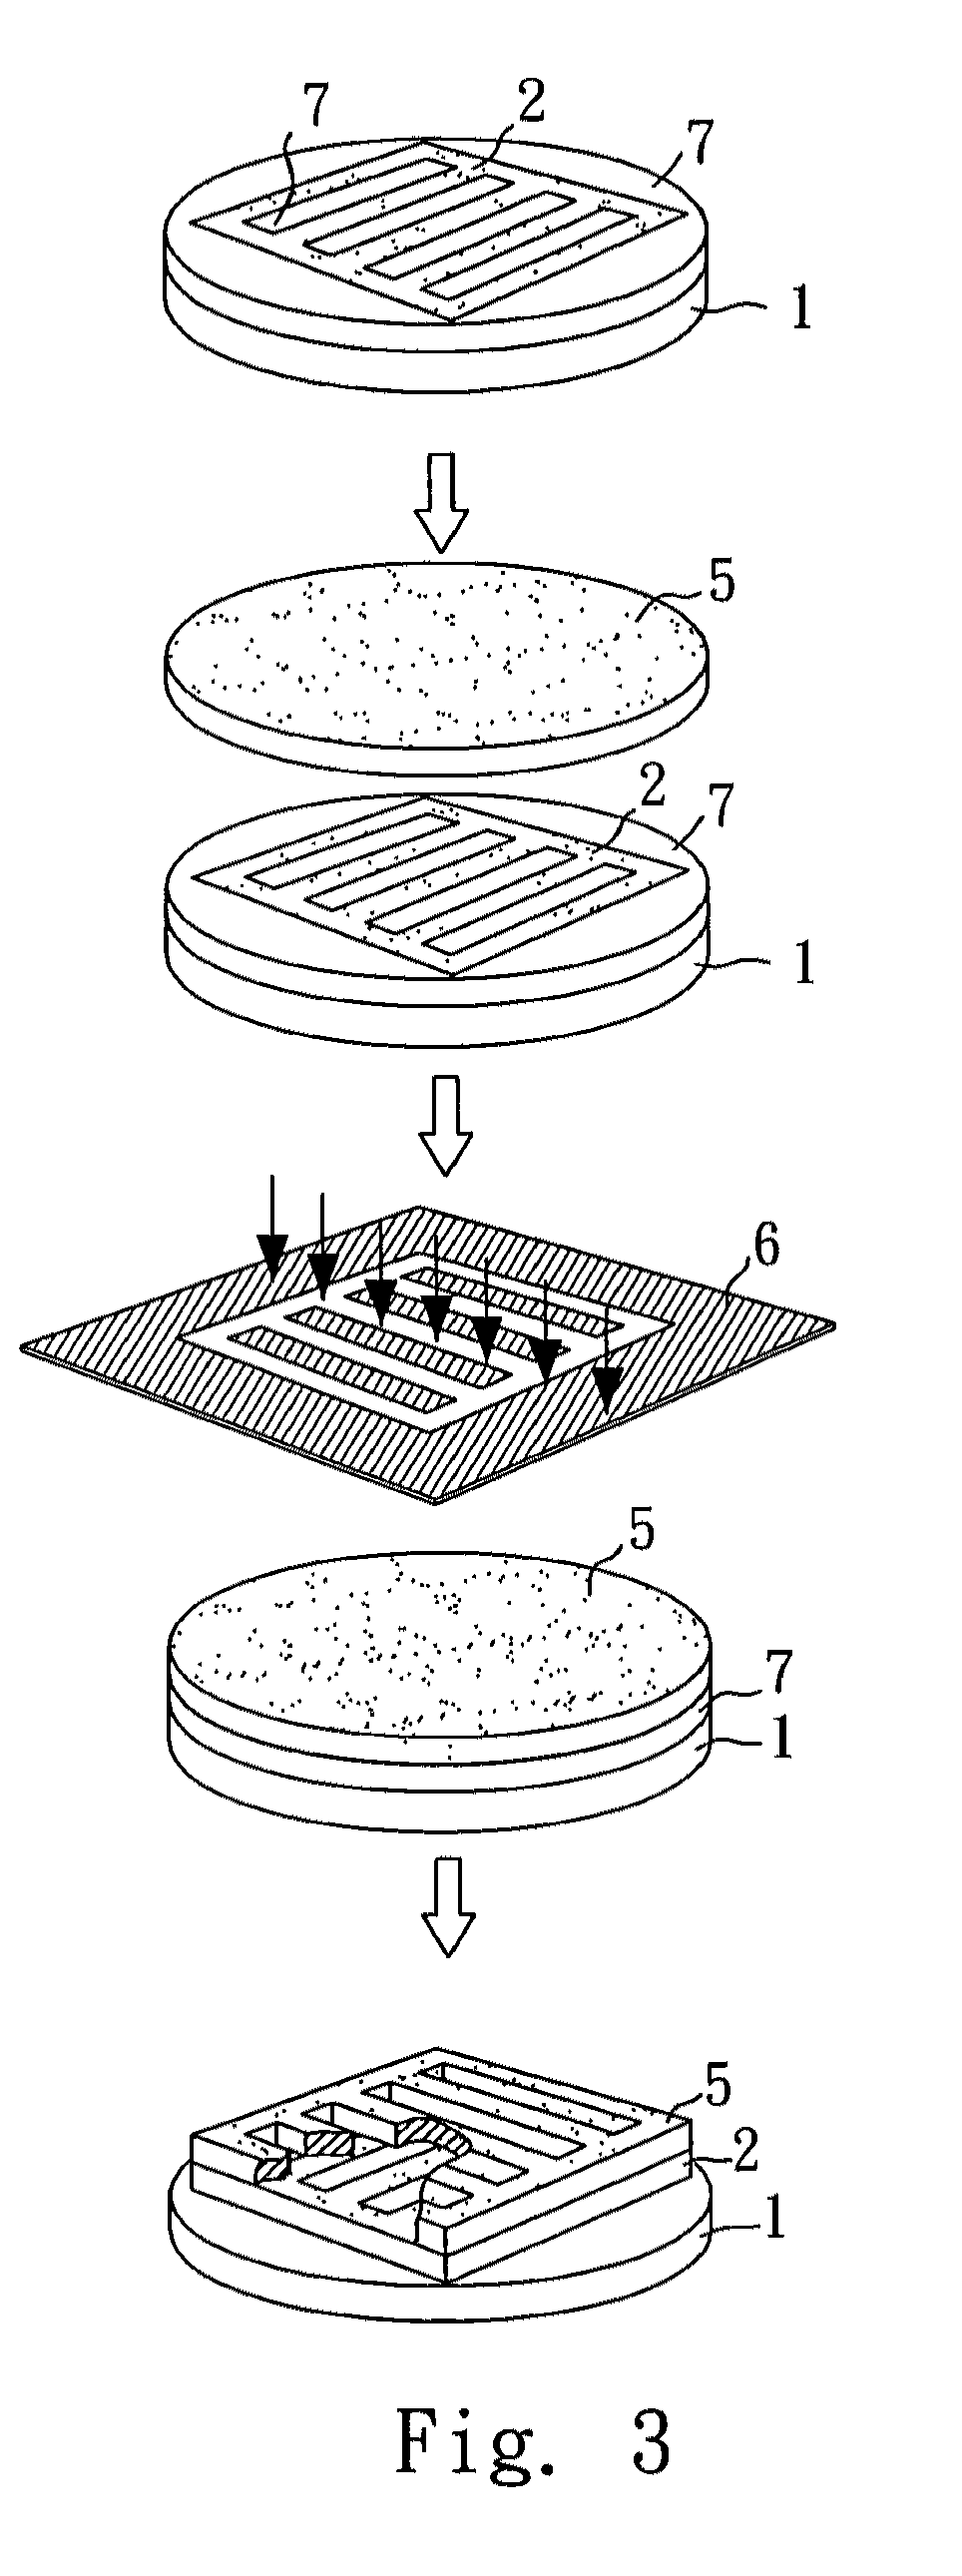 Cell culture apparatus and method of fabricating the apparatus